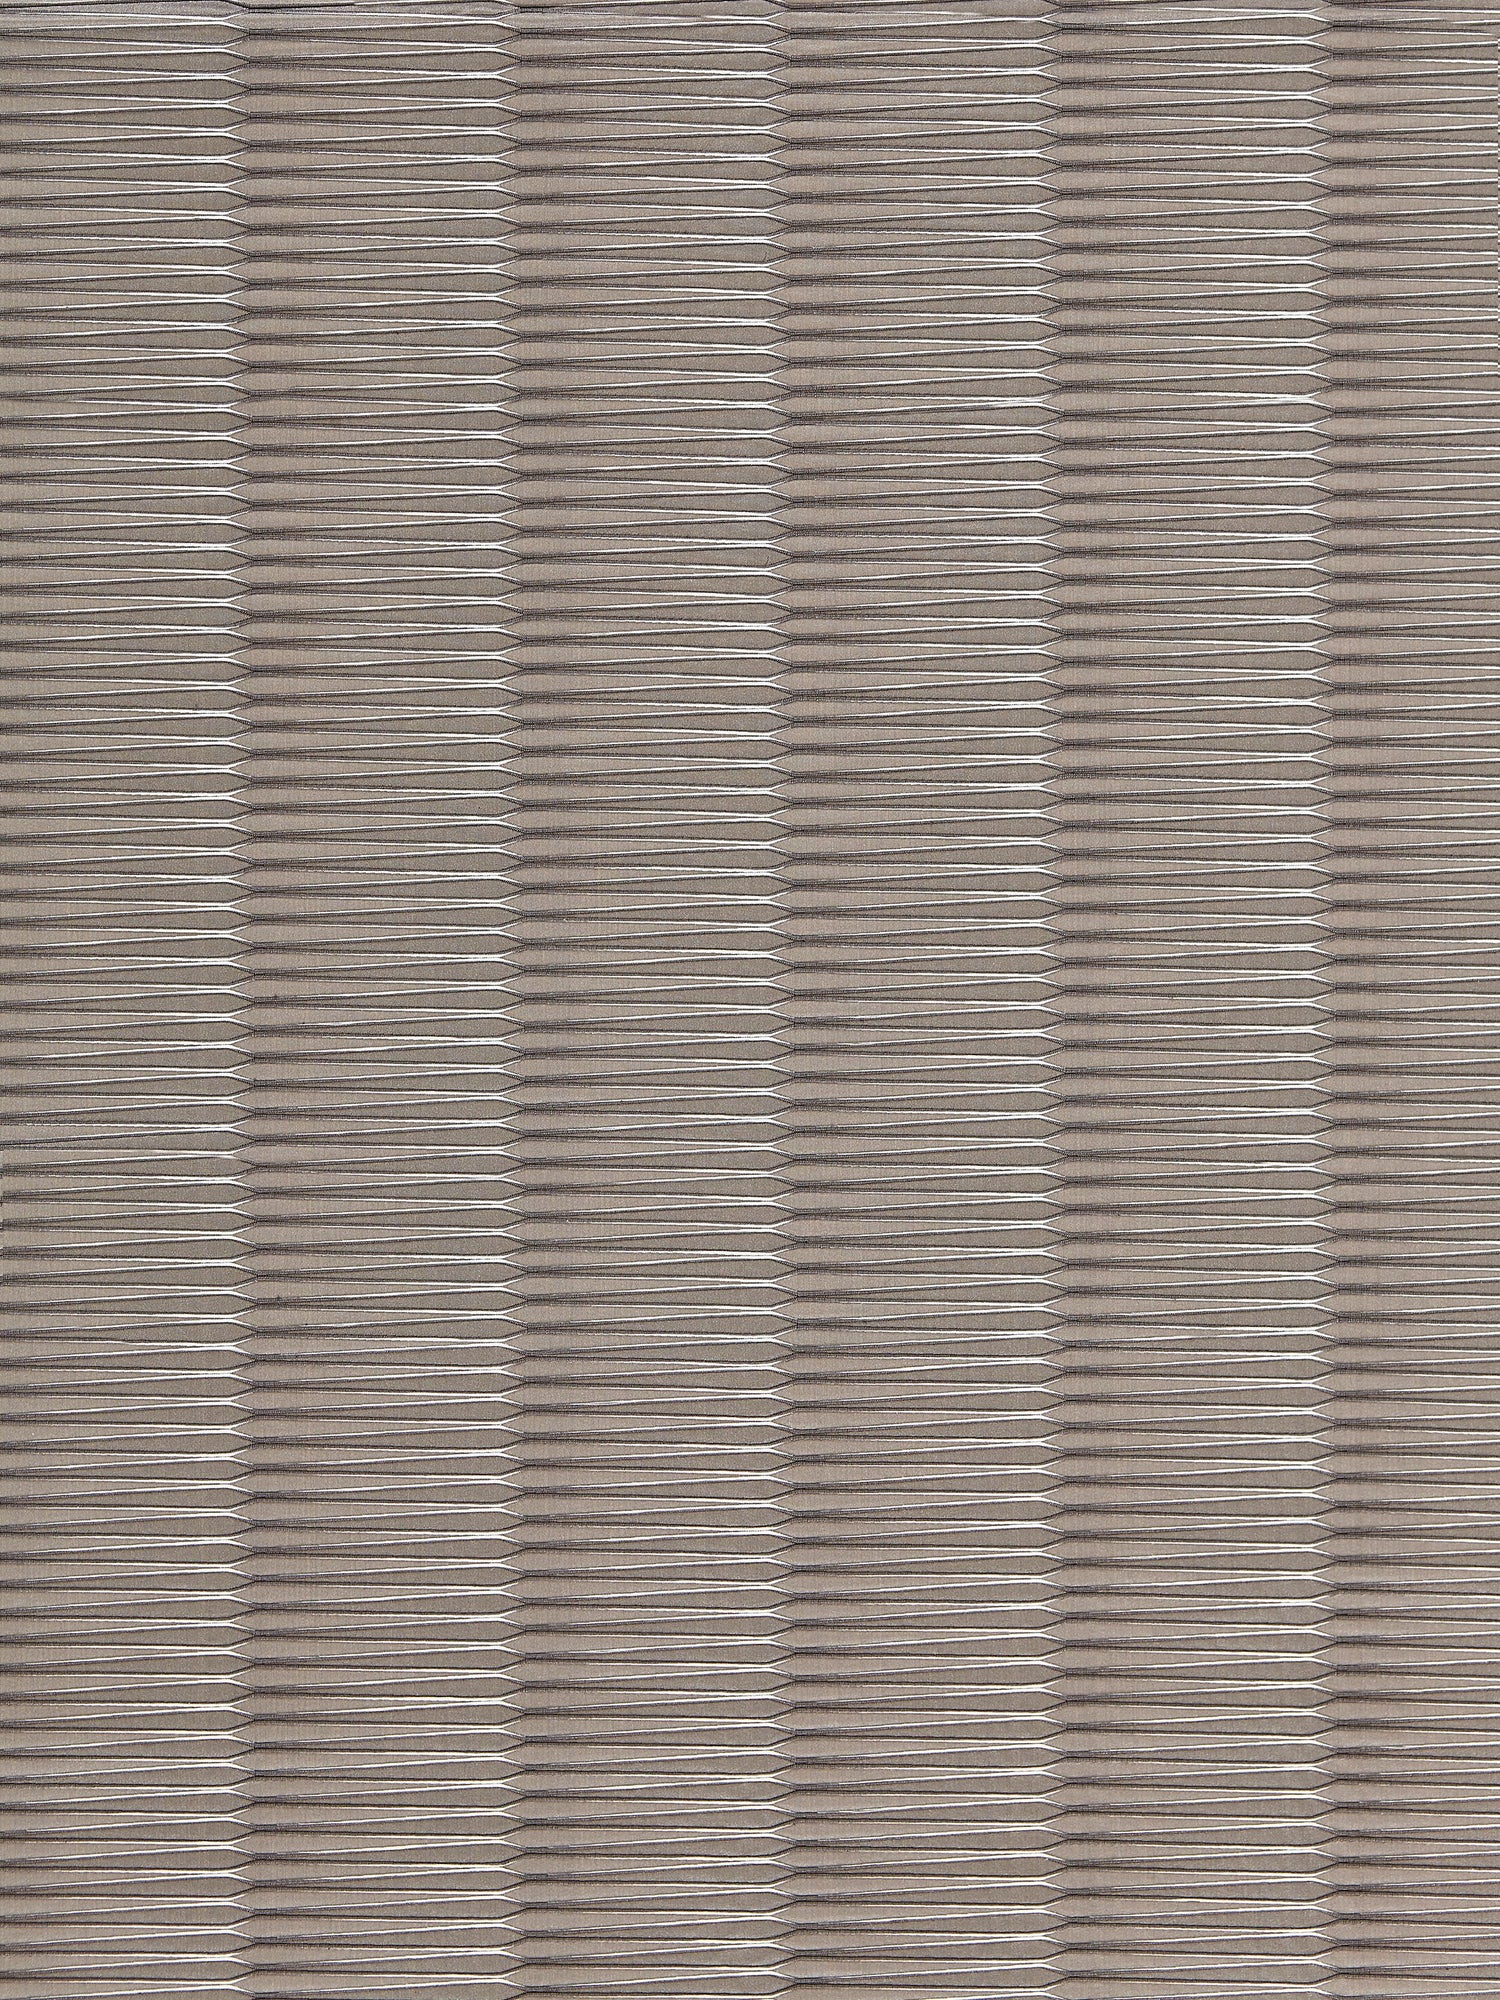 Wavelength fabric in smoke color - pattern number SC 000327141 - by Scalamandre in the Scalamandre Fabrics Book 1 collection